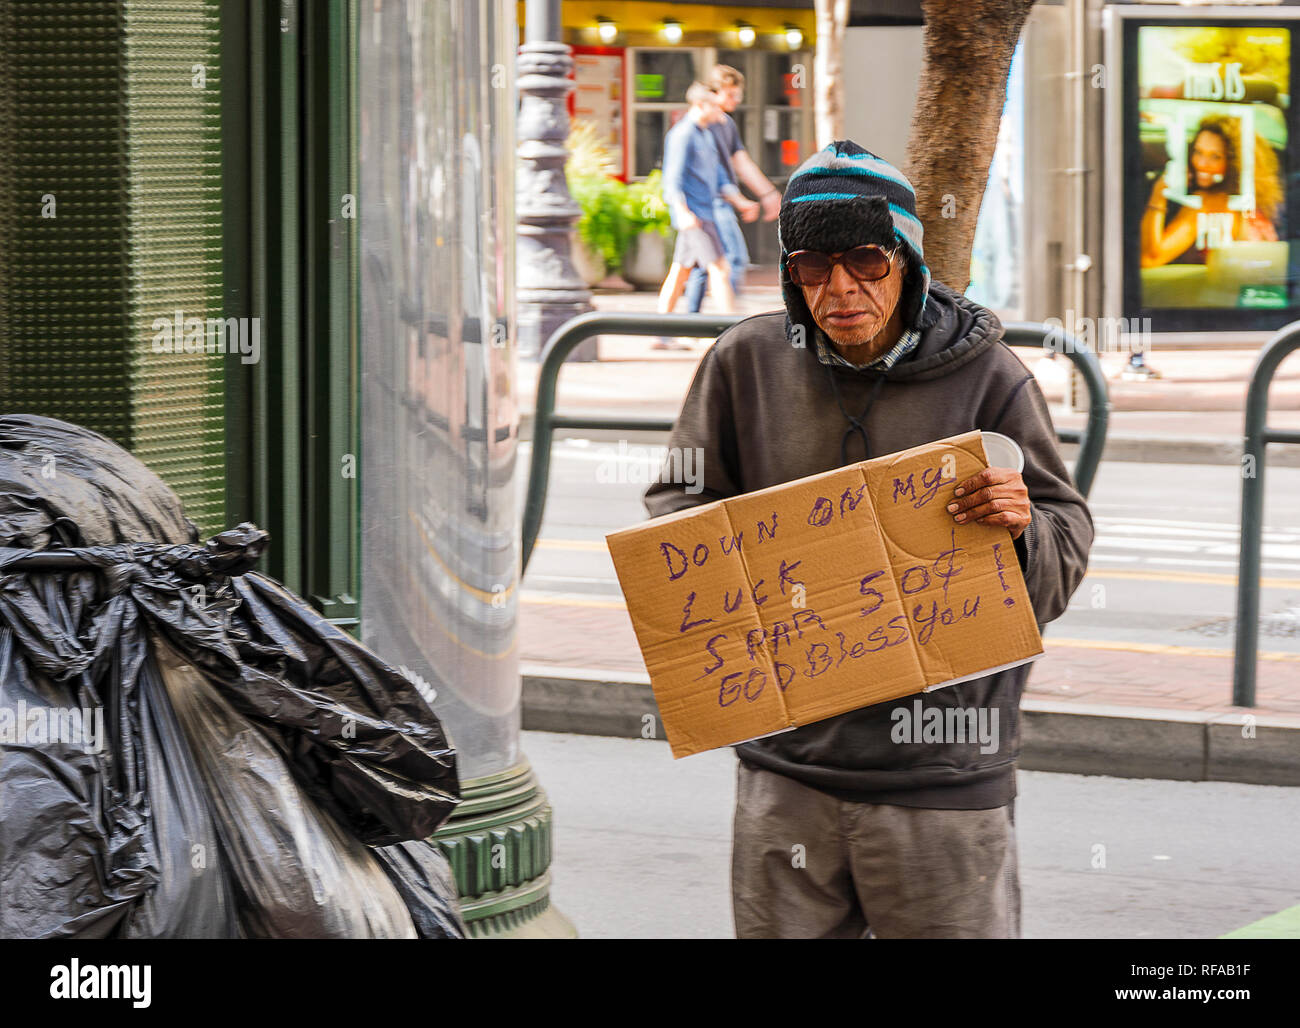 San Francisco, California, USA, October 2016: tramp holding a cardboard asking for alms on the streets of San Francisco, California, USA Stock Photo